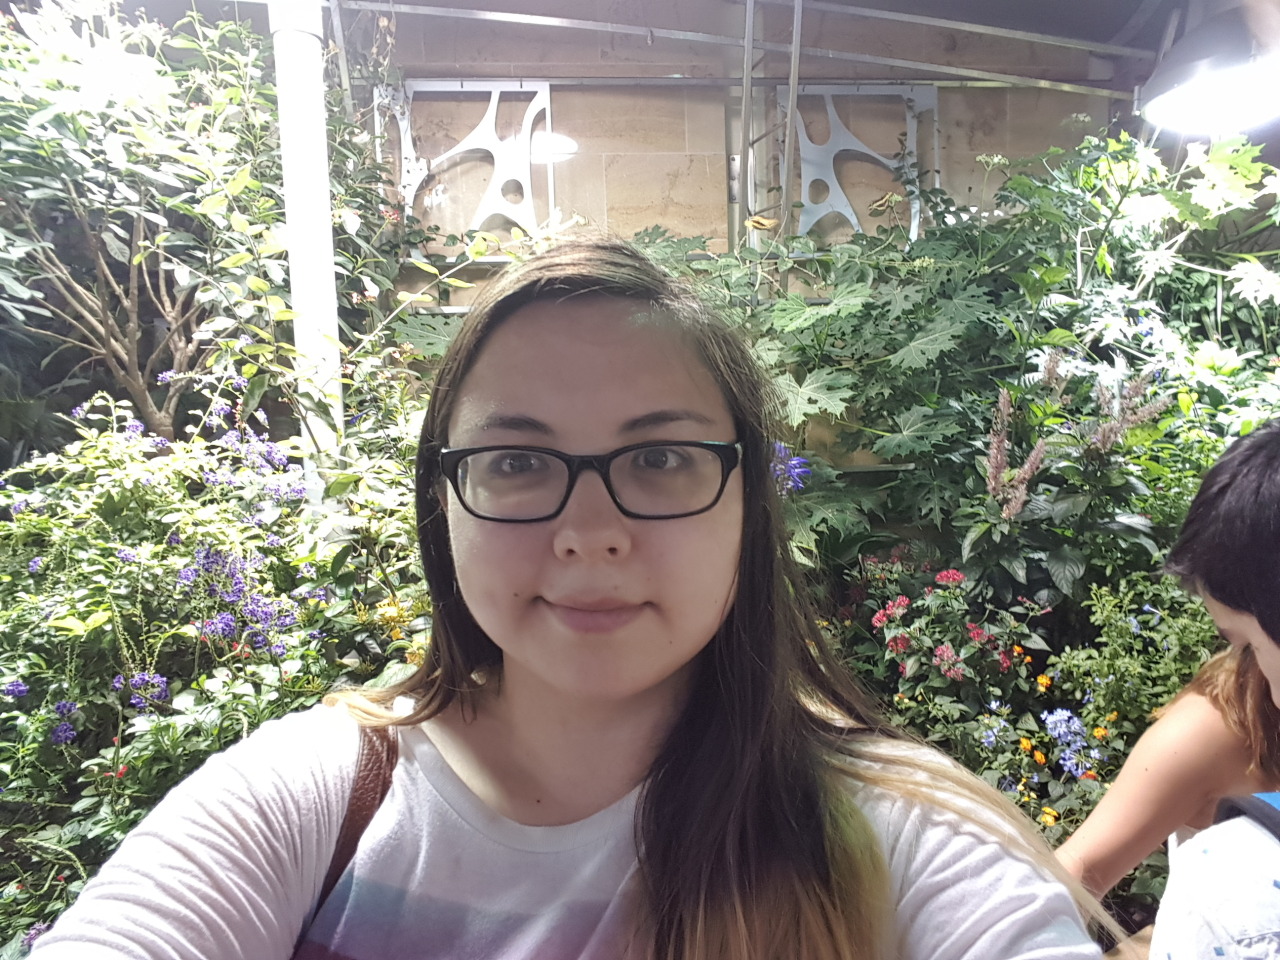 Me at the Live Butterfly Exhibit in downtown D.C. at the Natural History Museum.I